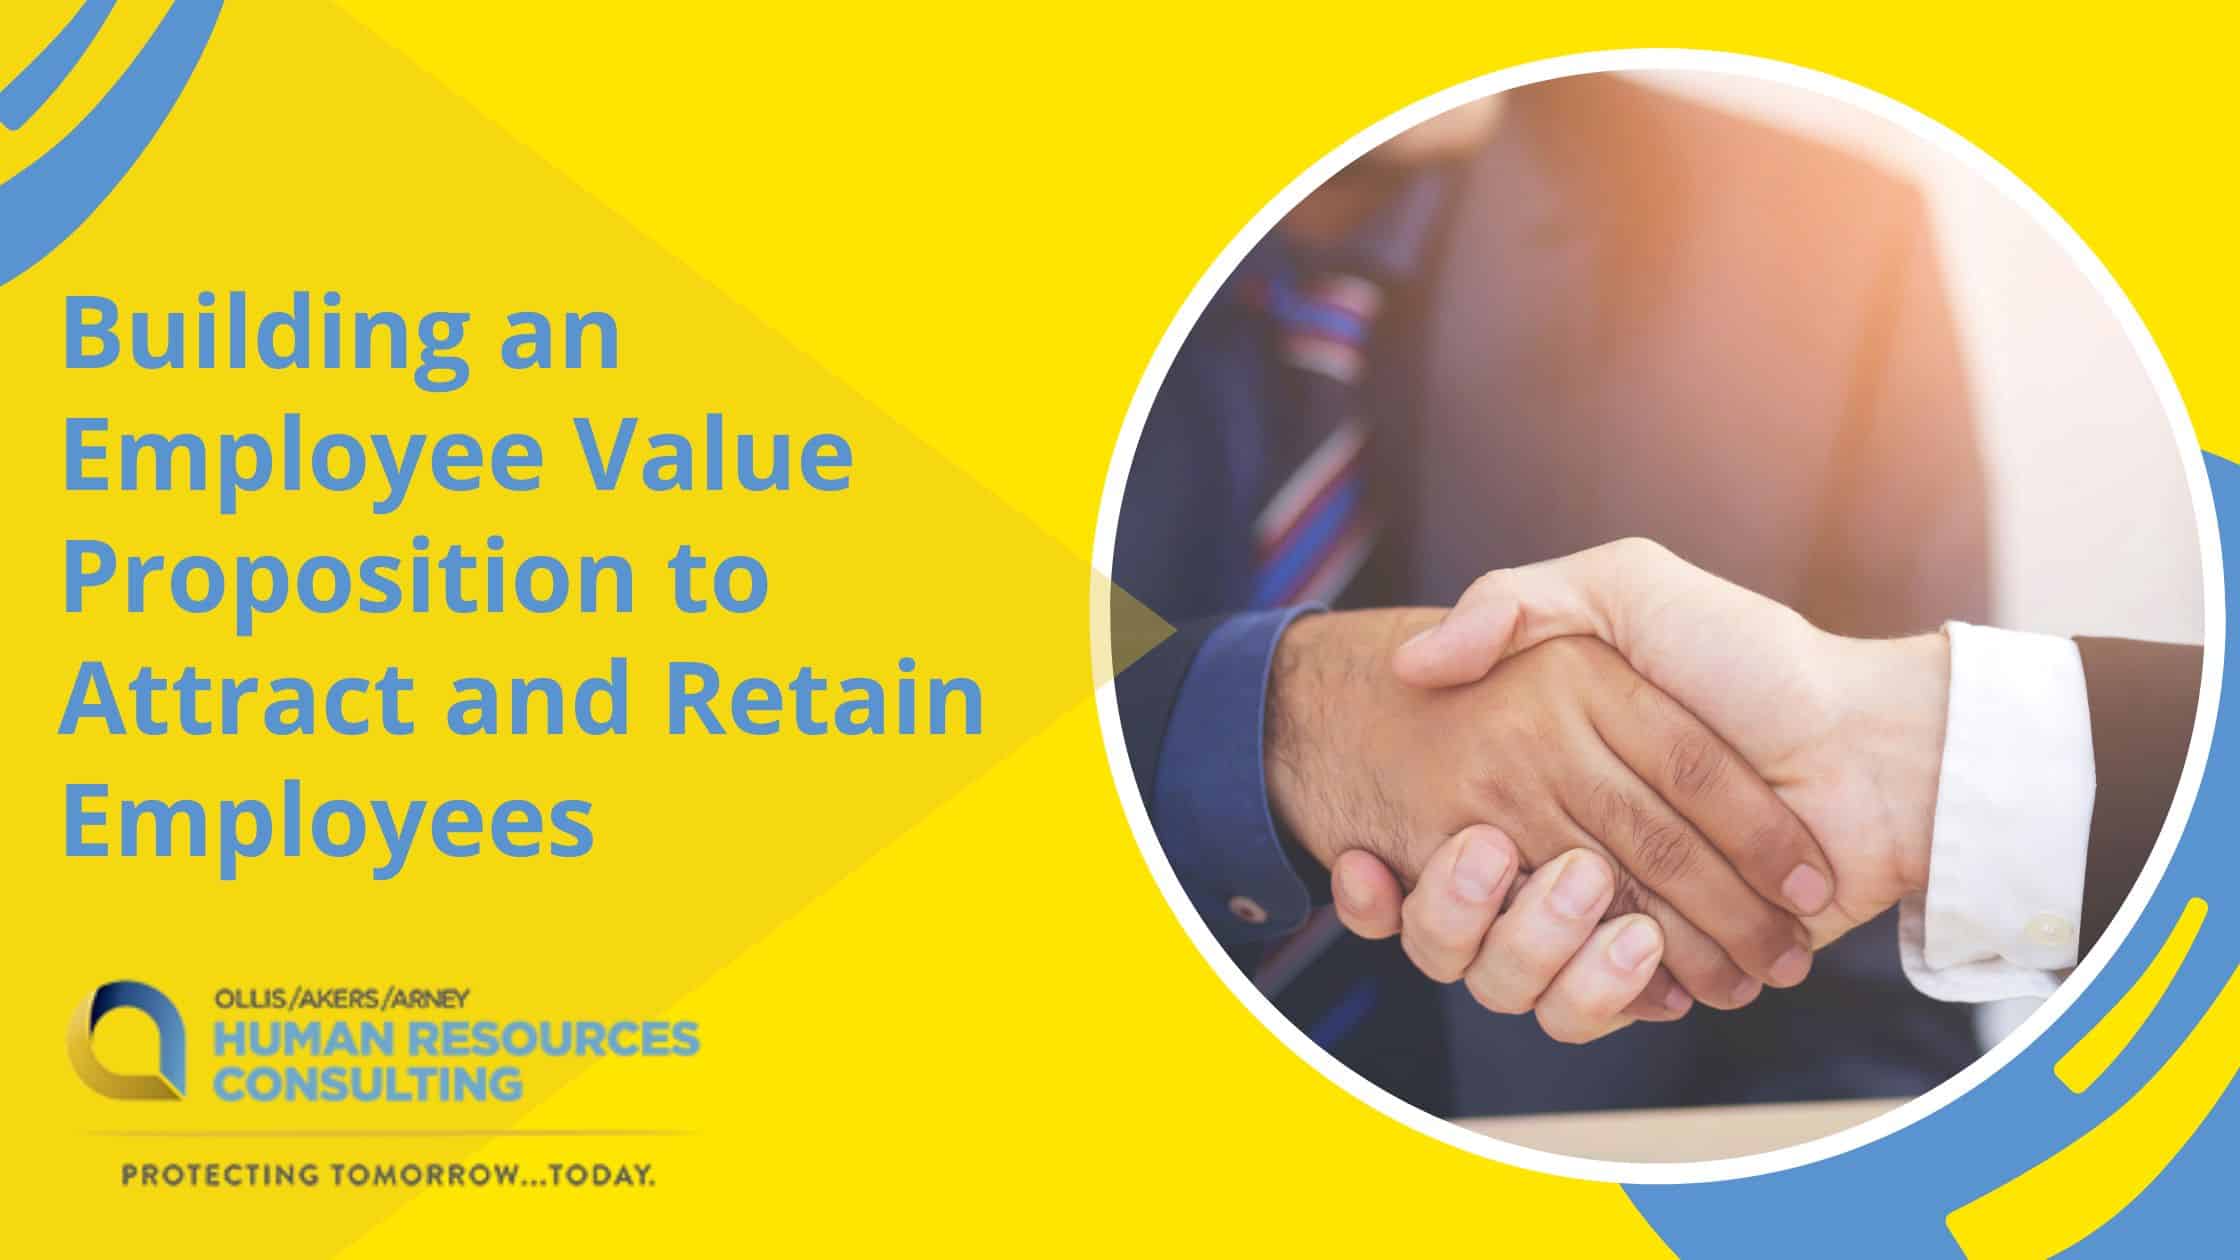 Building an Employee Value Proposition to Attract and Retain Employees